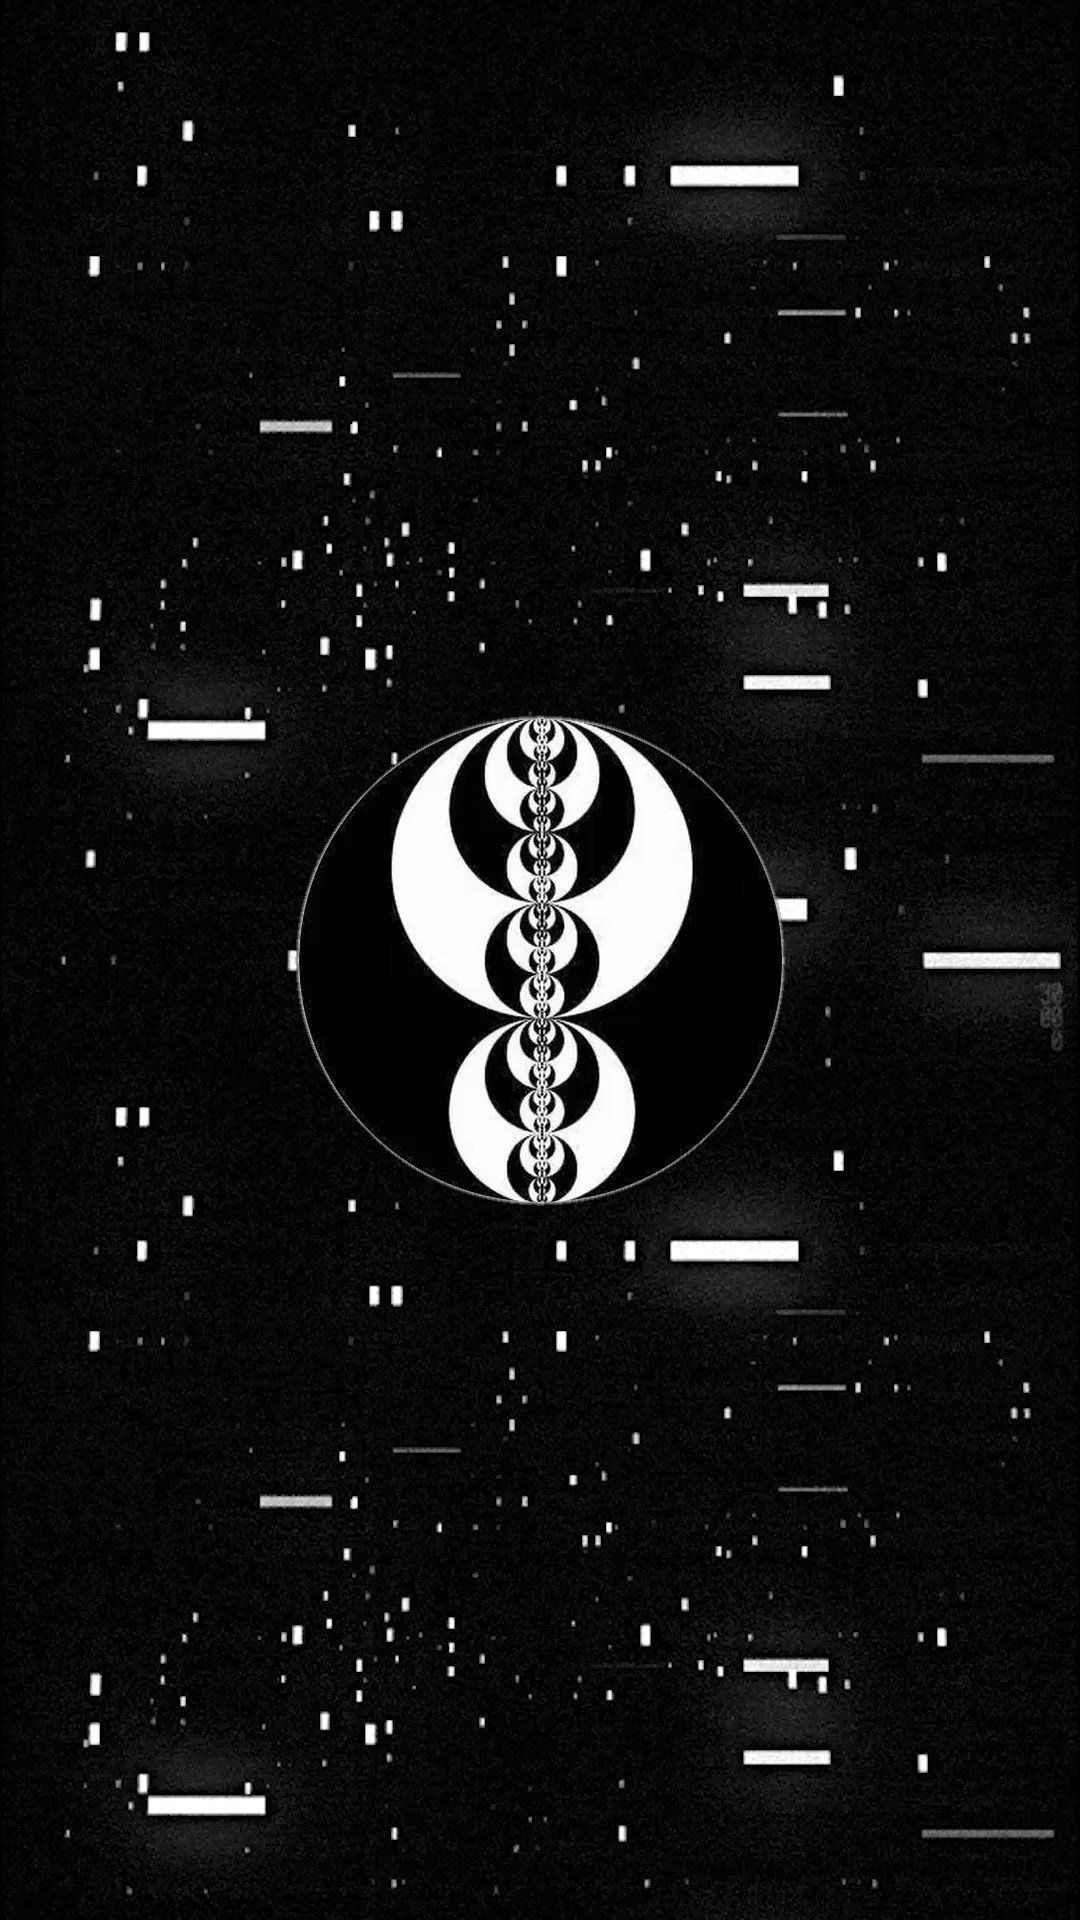 A black and white image of a black background with white lines and squares. In the center is a black and white circle with a black and white spiral pattern in the center. - Star Trek